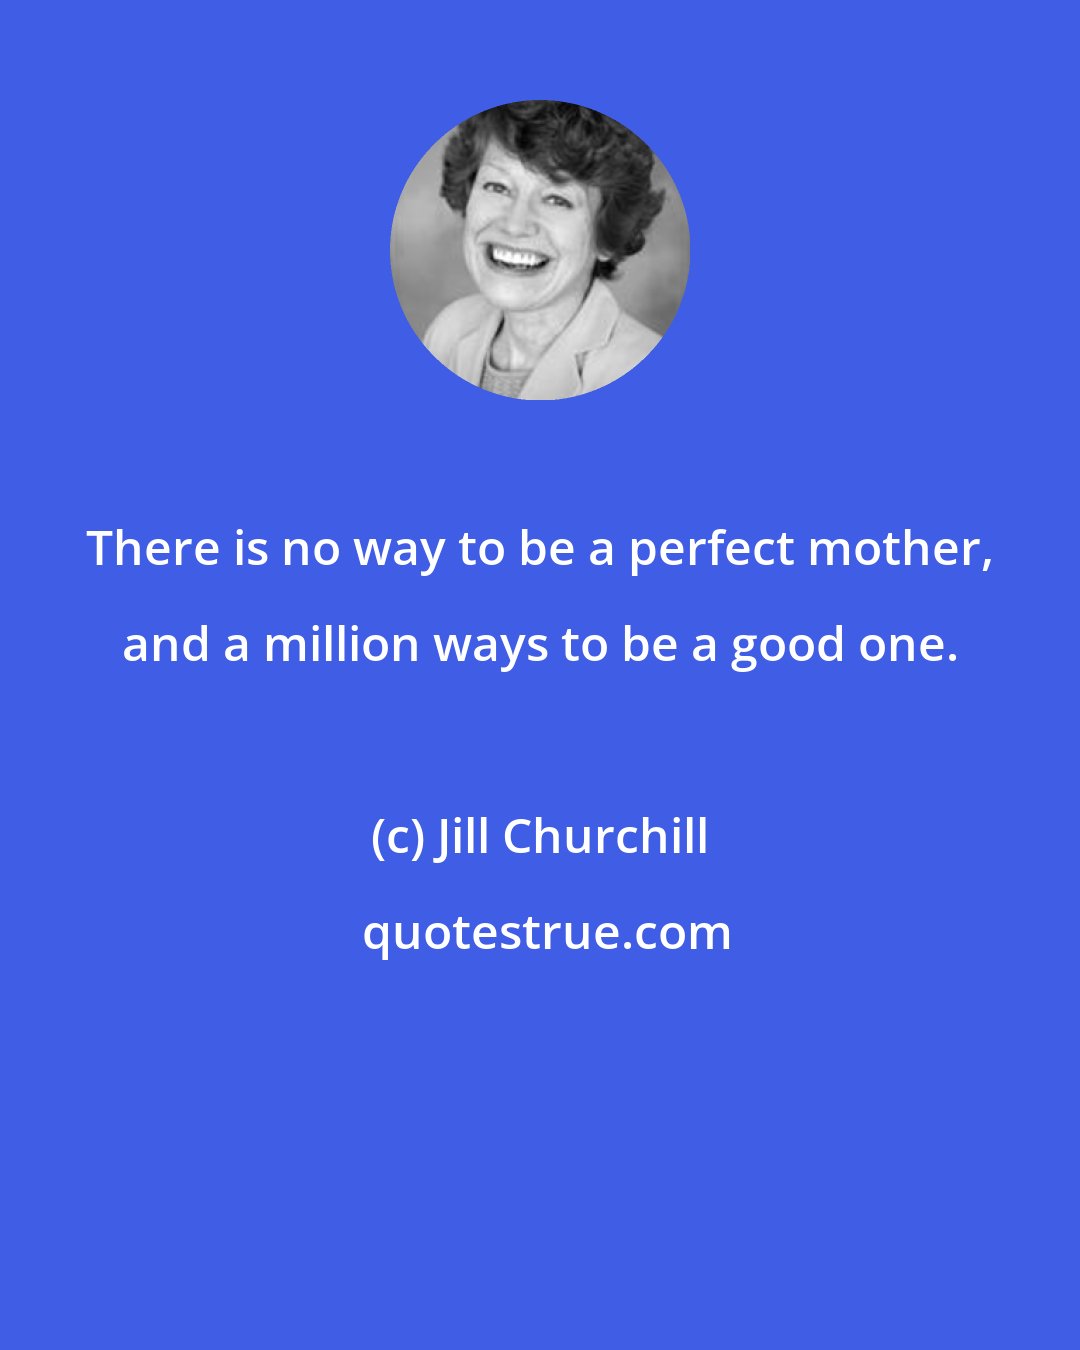 Jill Churchill: There is no way to be a perfect mother, and a million ways to be a good one.